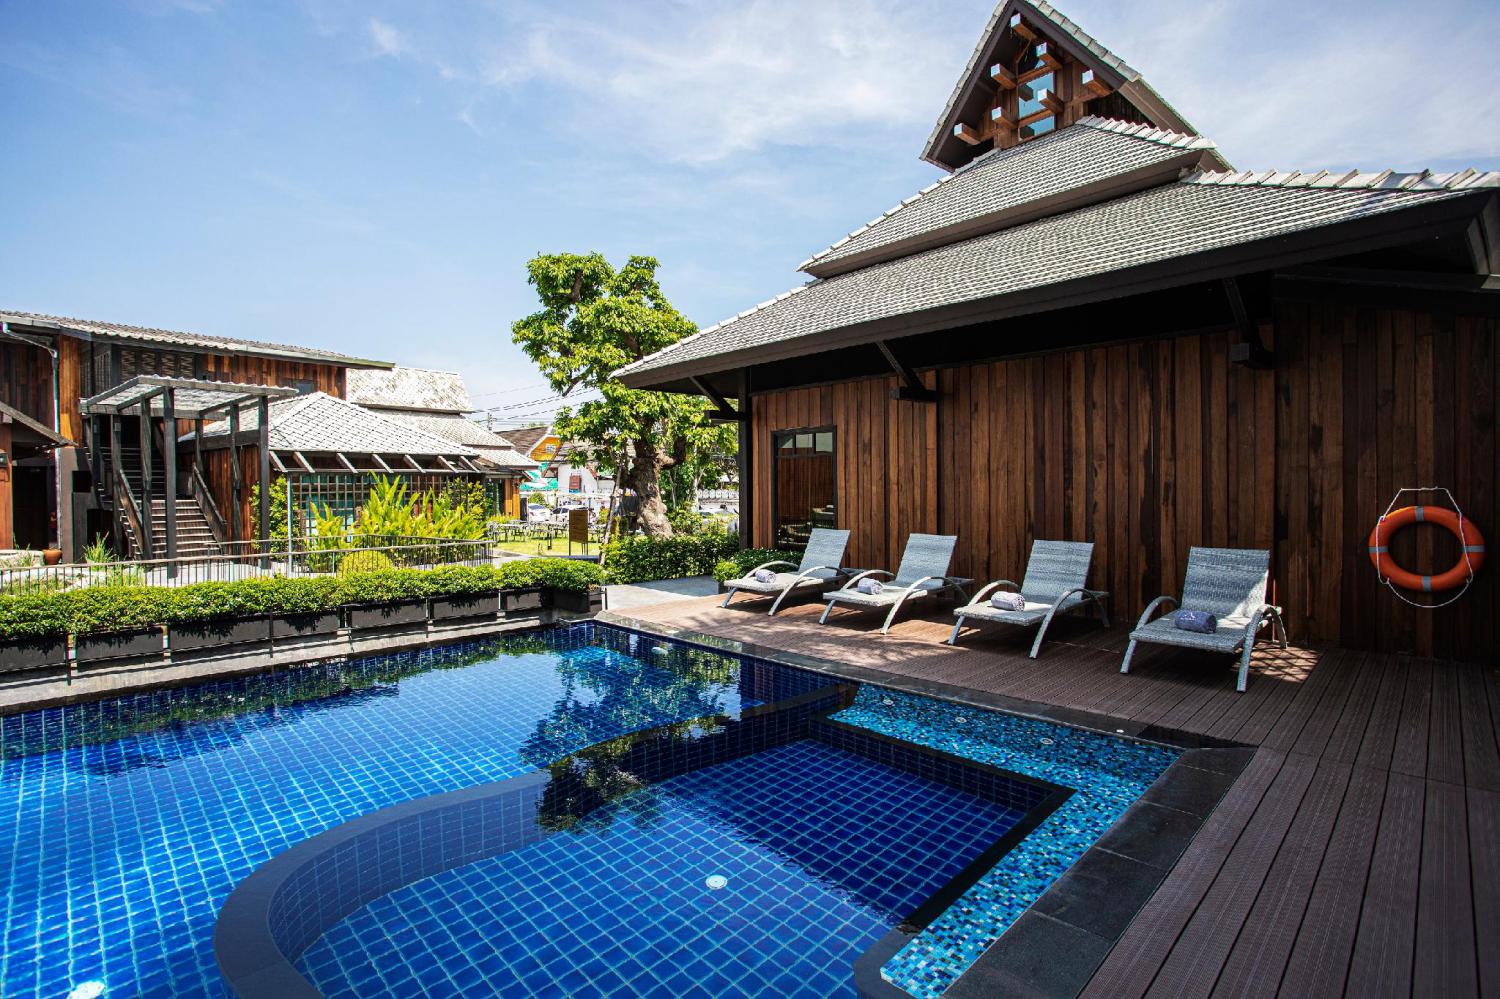 The Chiang Mai Old Town Hotel - Image 1